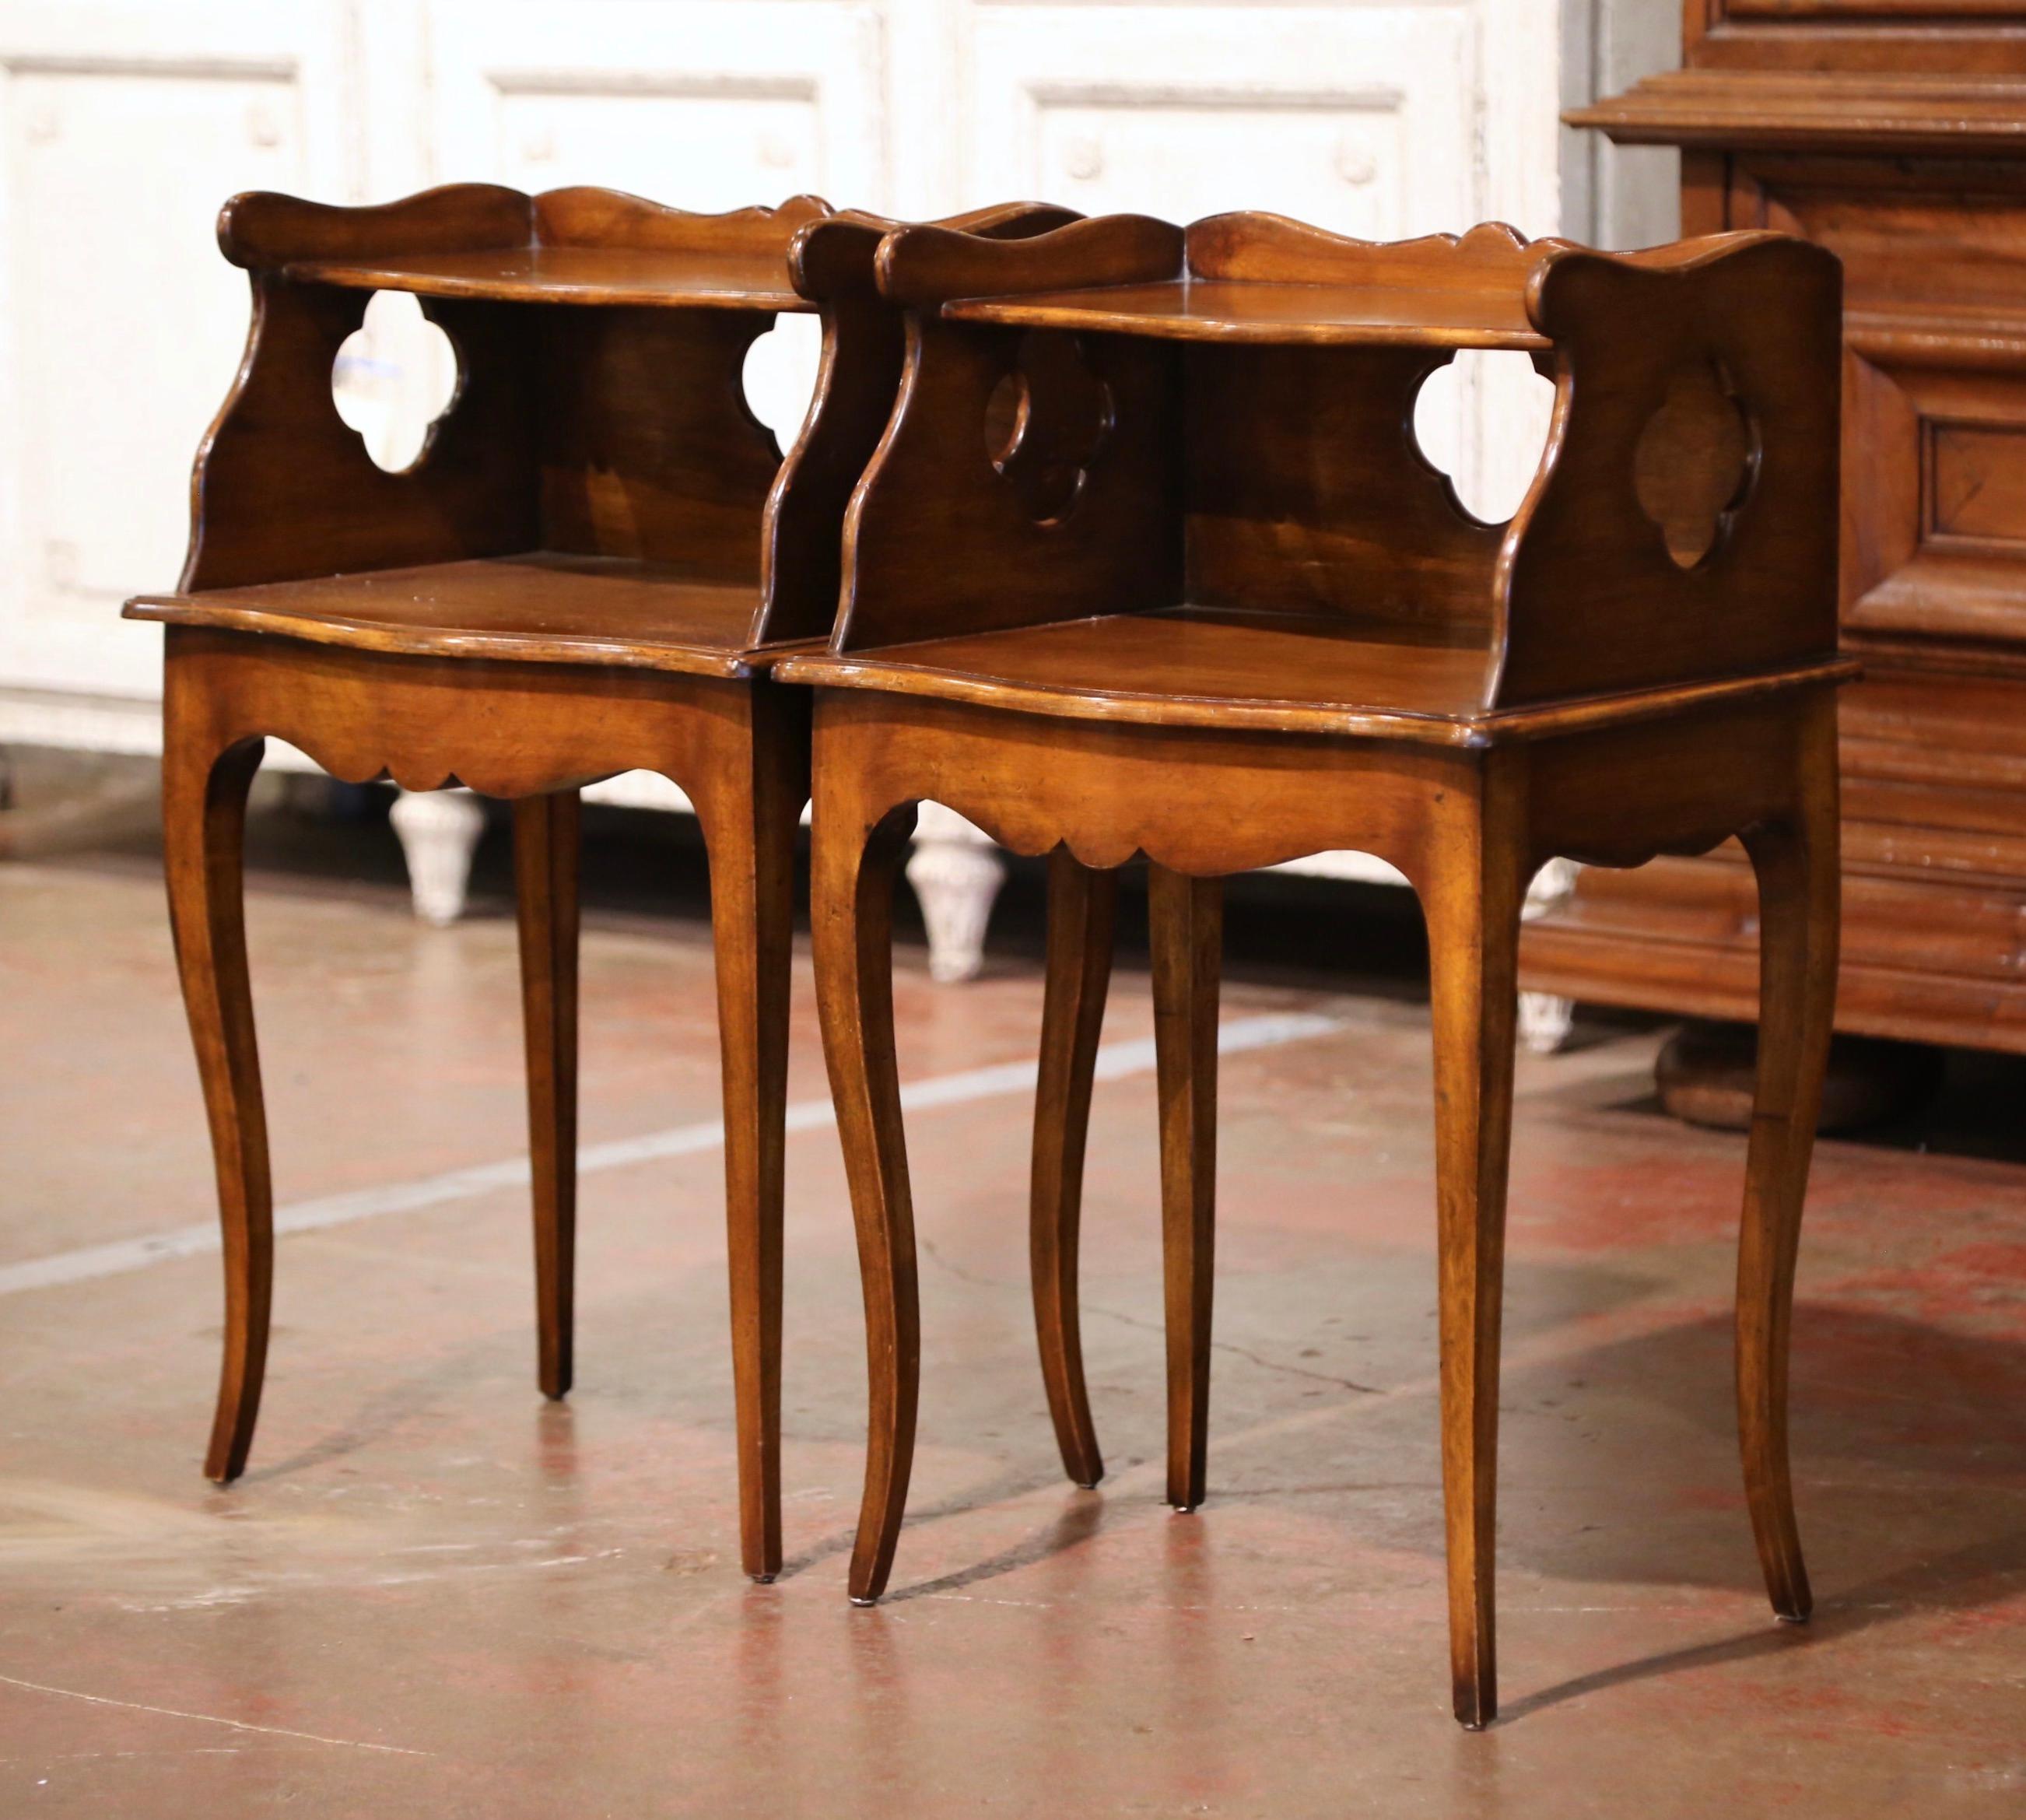 These elegant antique tables were created in Provence, France, circa 1920. Each fruitwood cabinet stands on cabriole legs over a bombe and scalloped apron. The table features a two-tier plateau with pierced sides and back in between, and the top